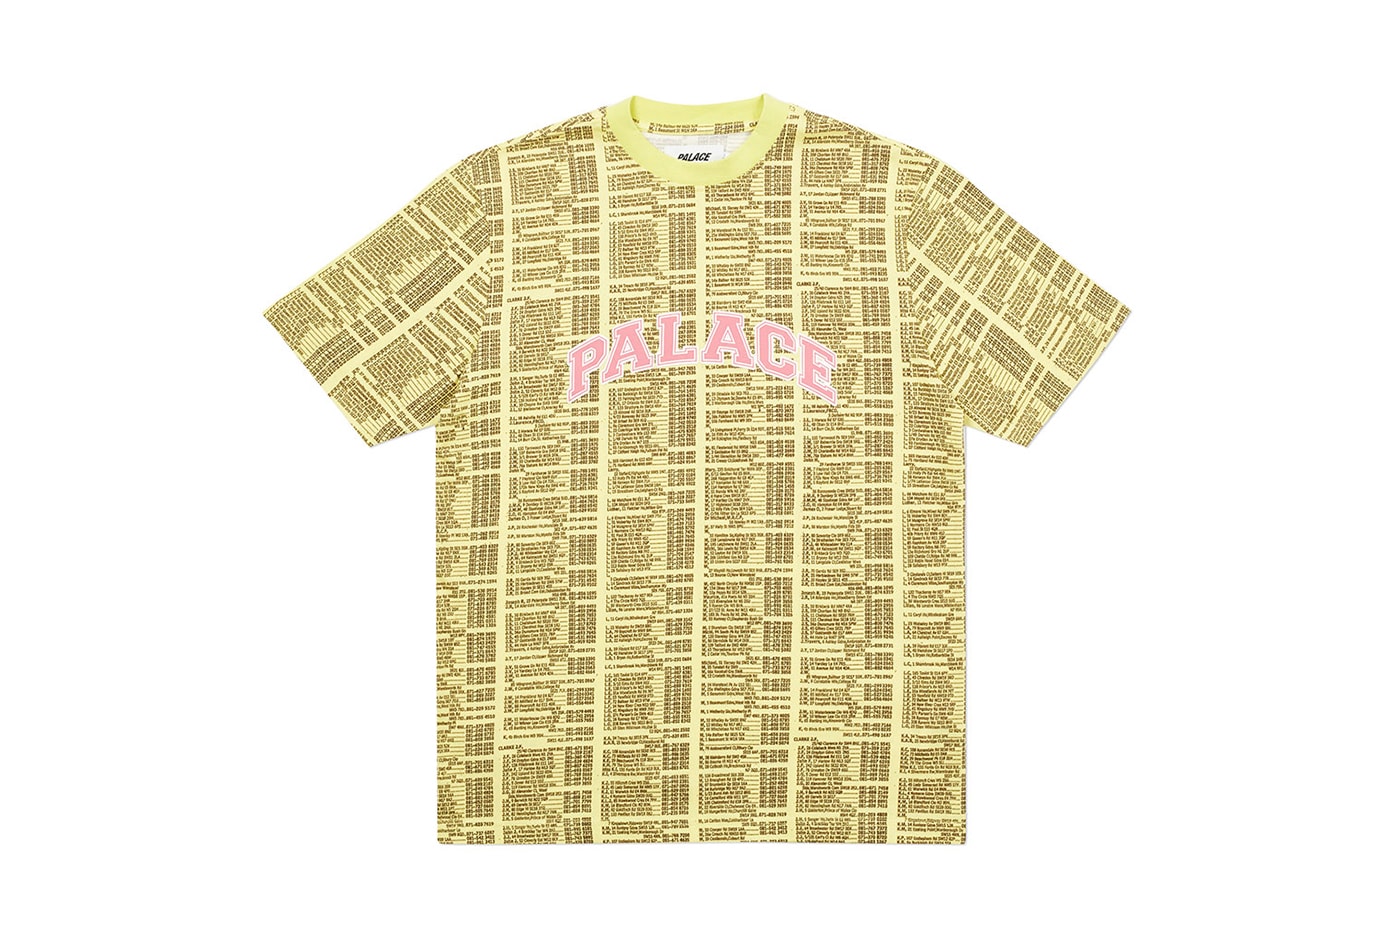 Palace Fall 2020 Tees T-shirts Tri Ferg Release Info Date Buy Price